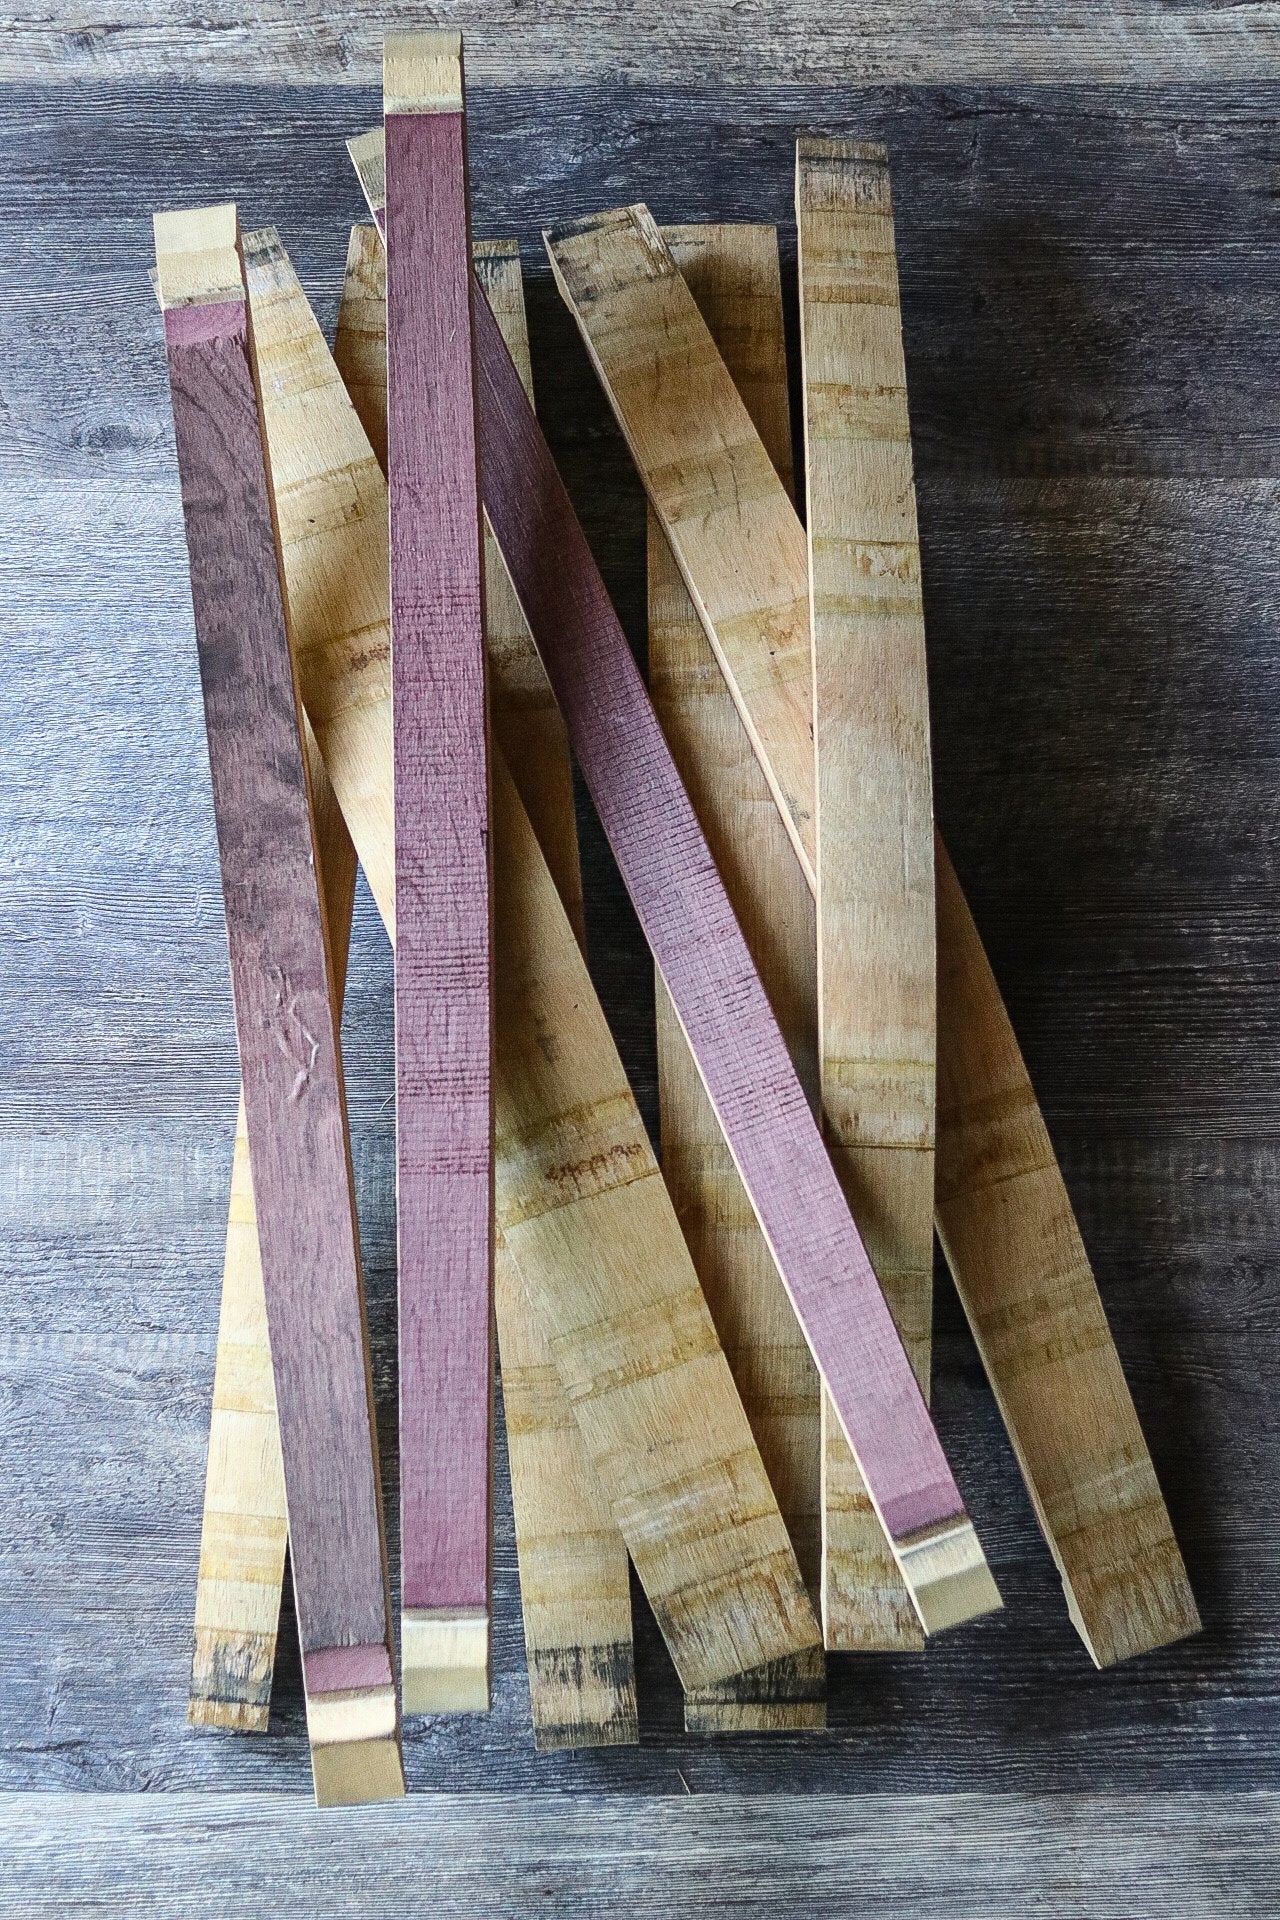 Whiskey and Wine Barrel Stave Bundles